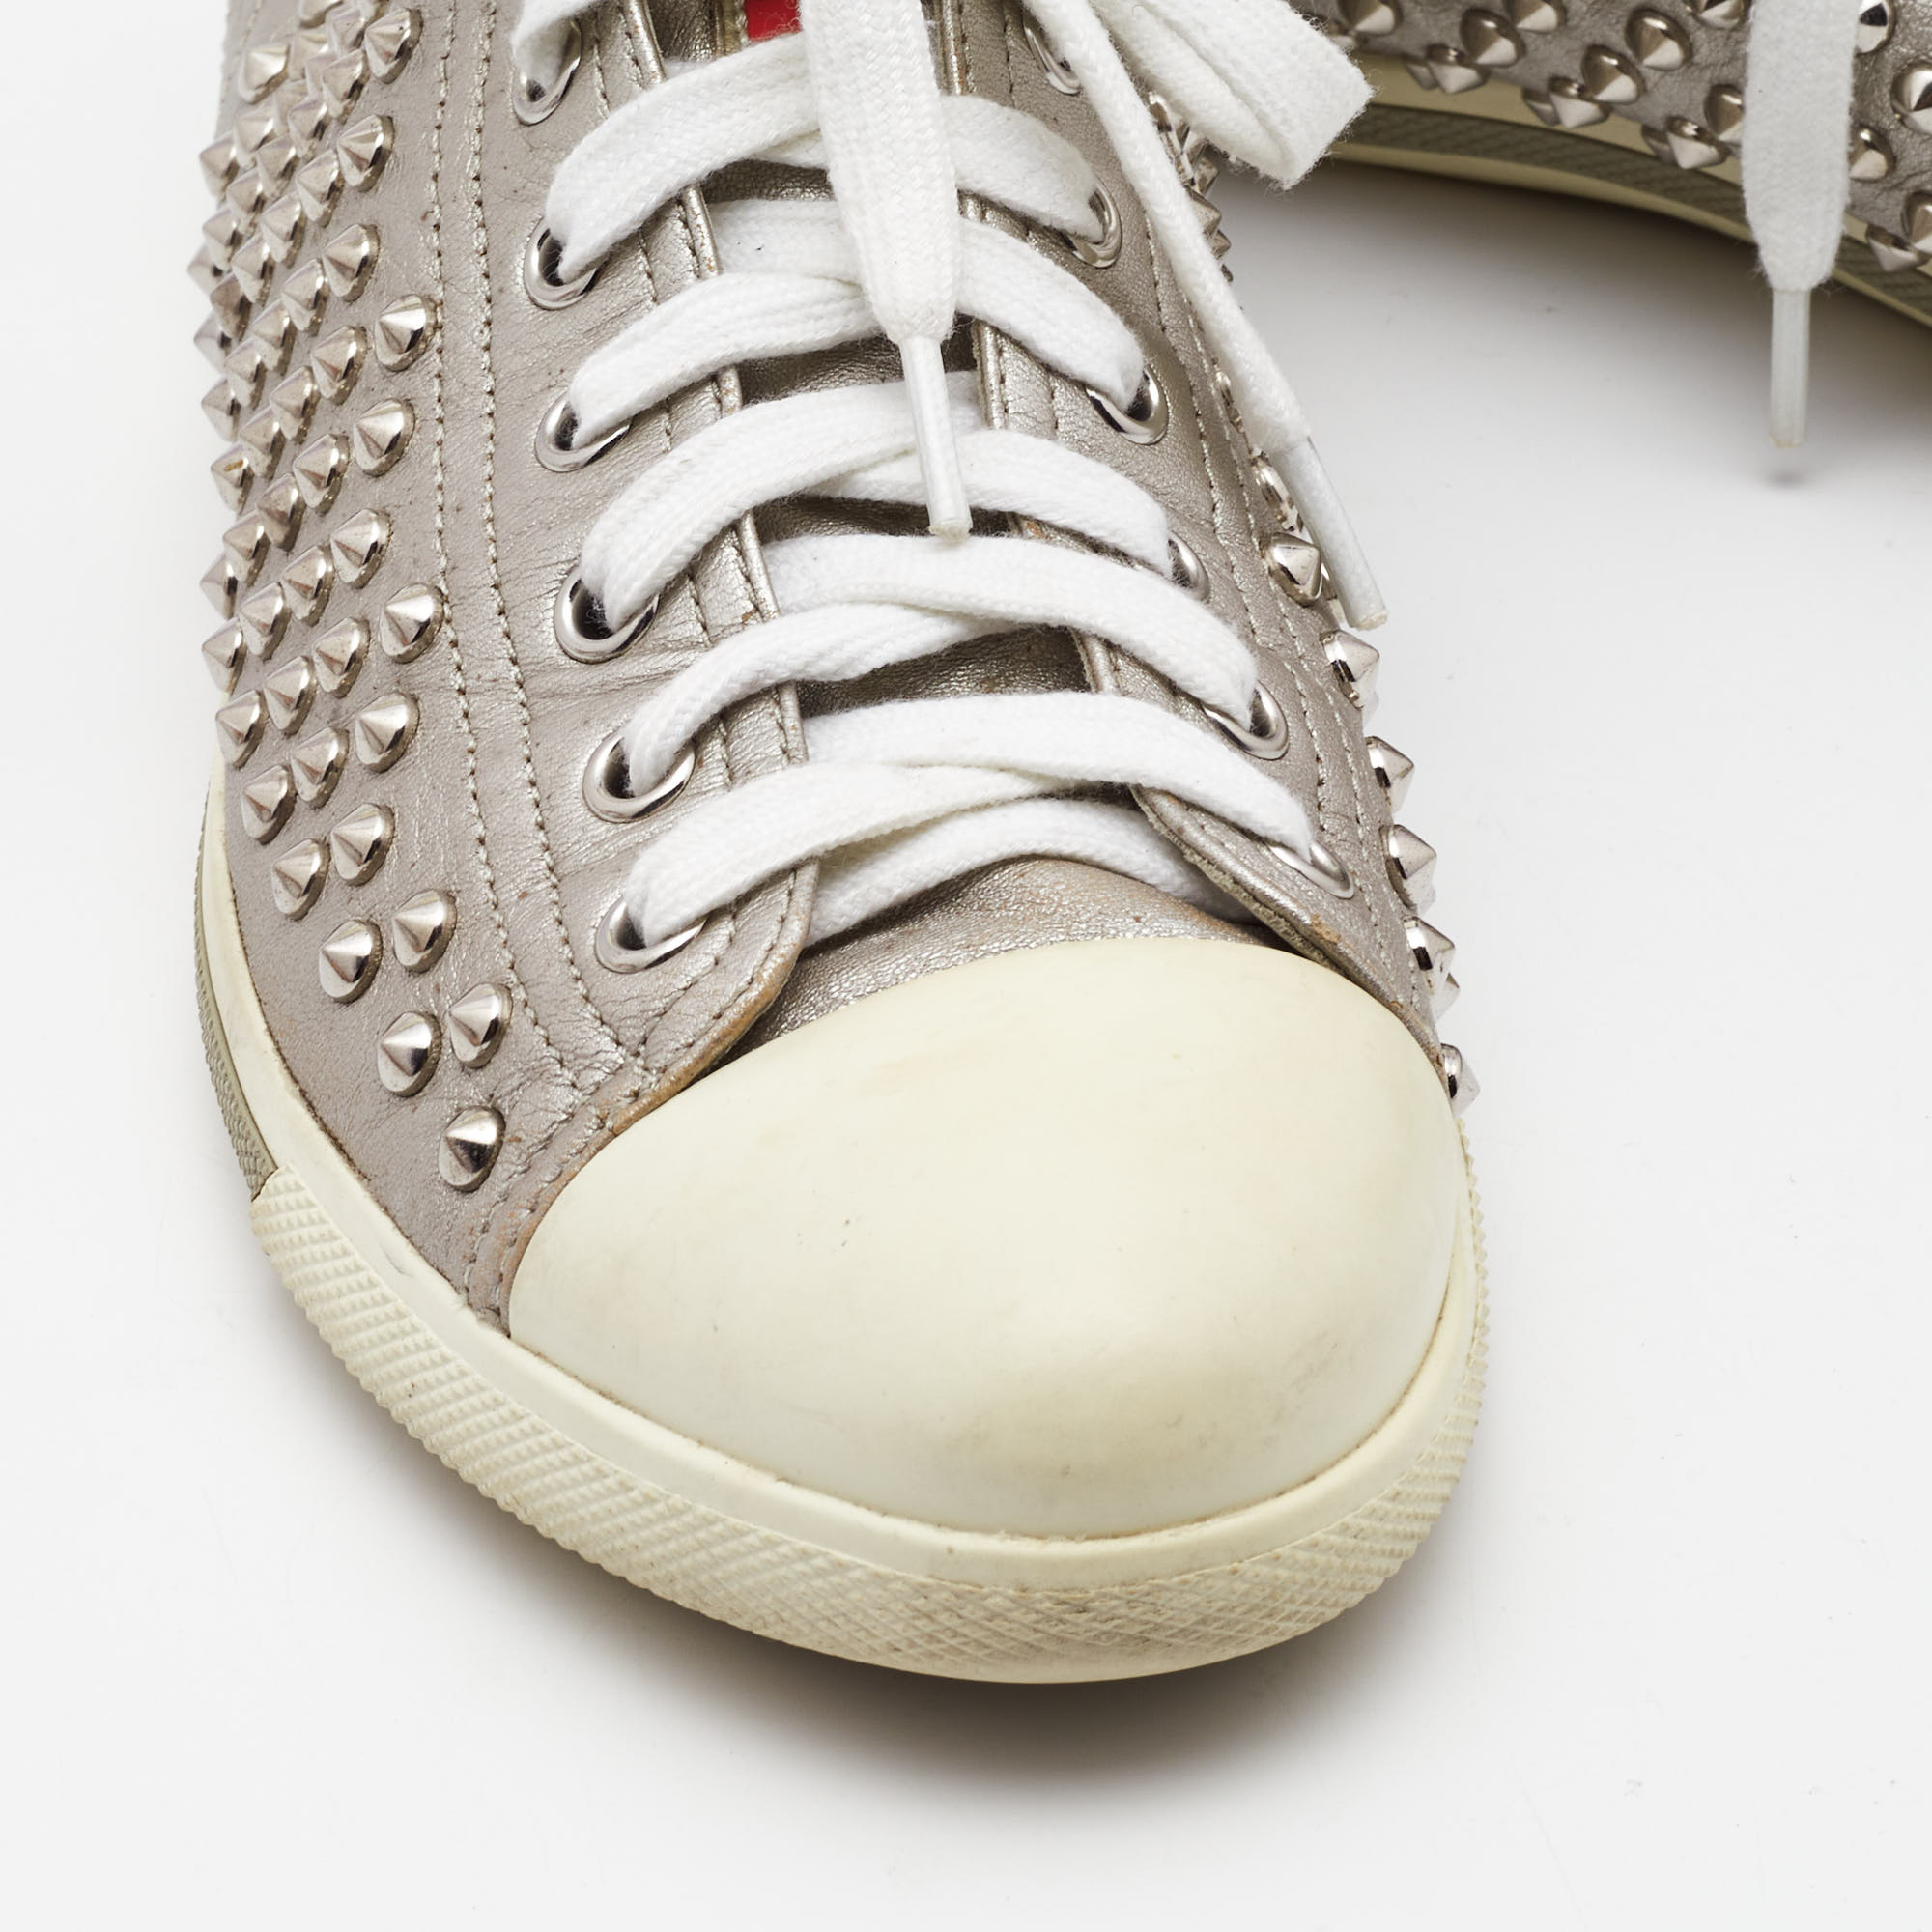 Prada Silver Leather Stud High Top Sneakers Size 40